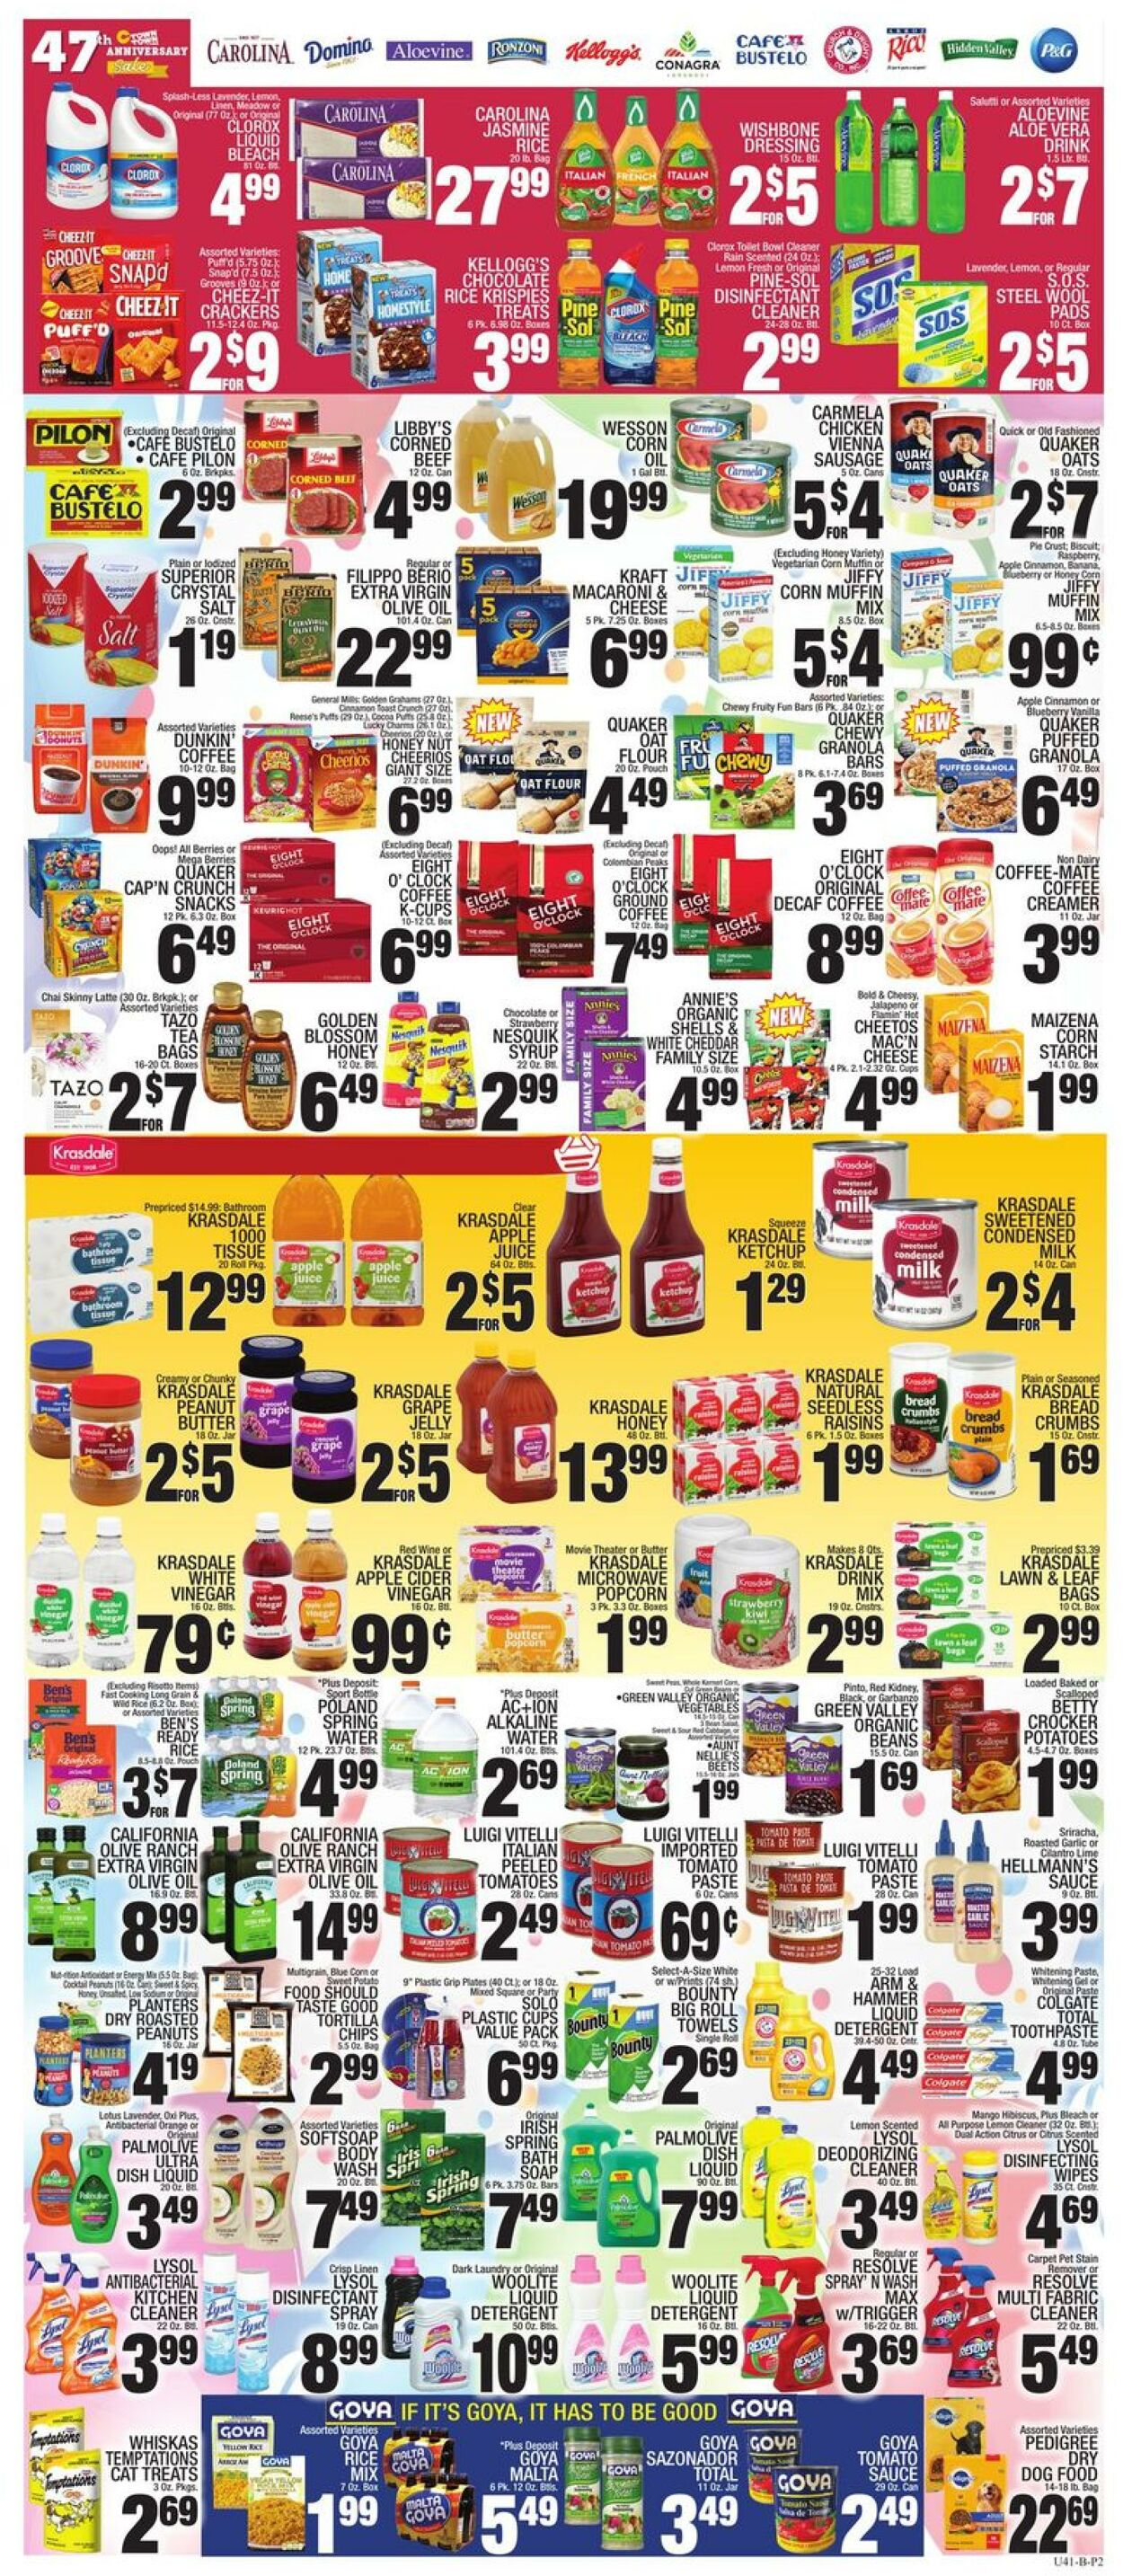 Weekly ad CTown 09/30/2022 - 10/06/2022